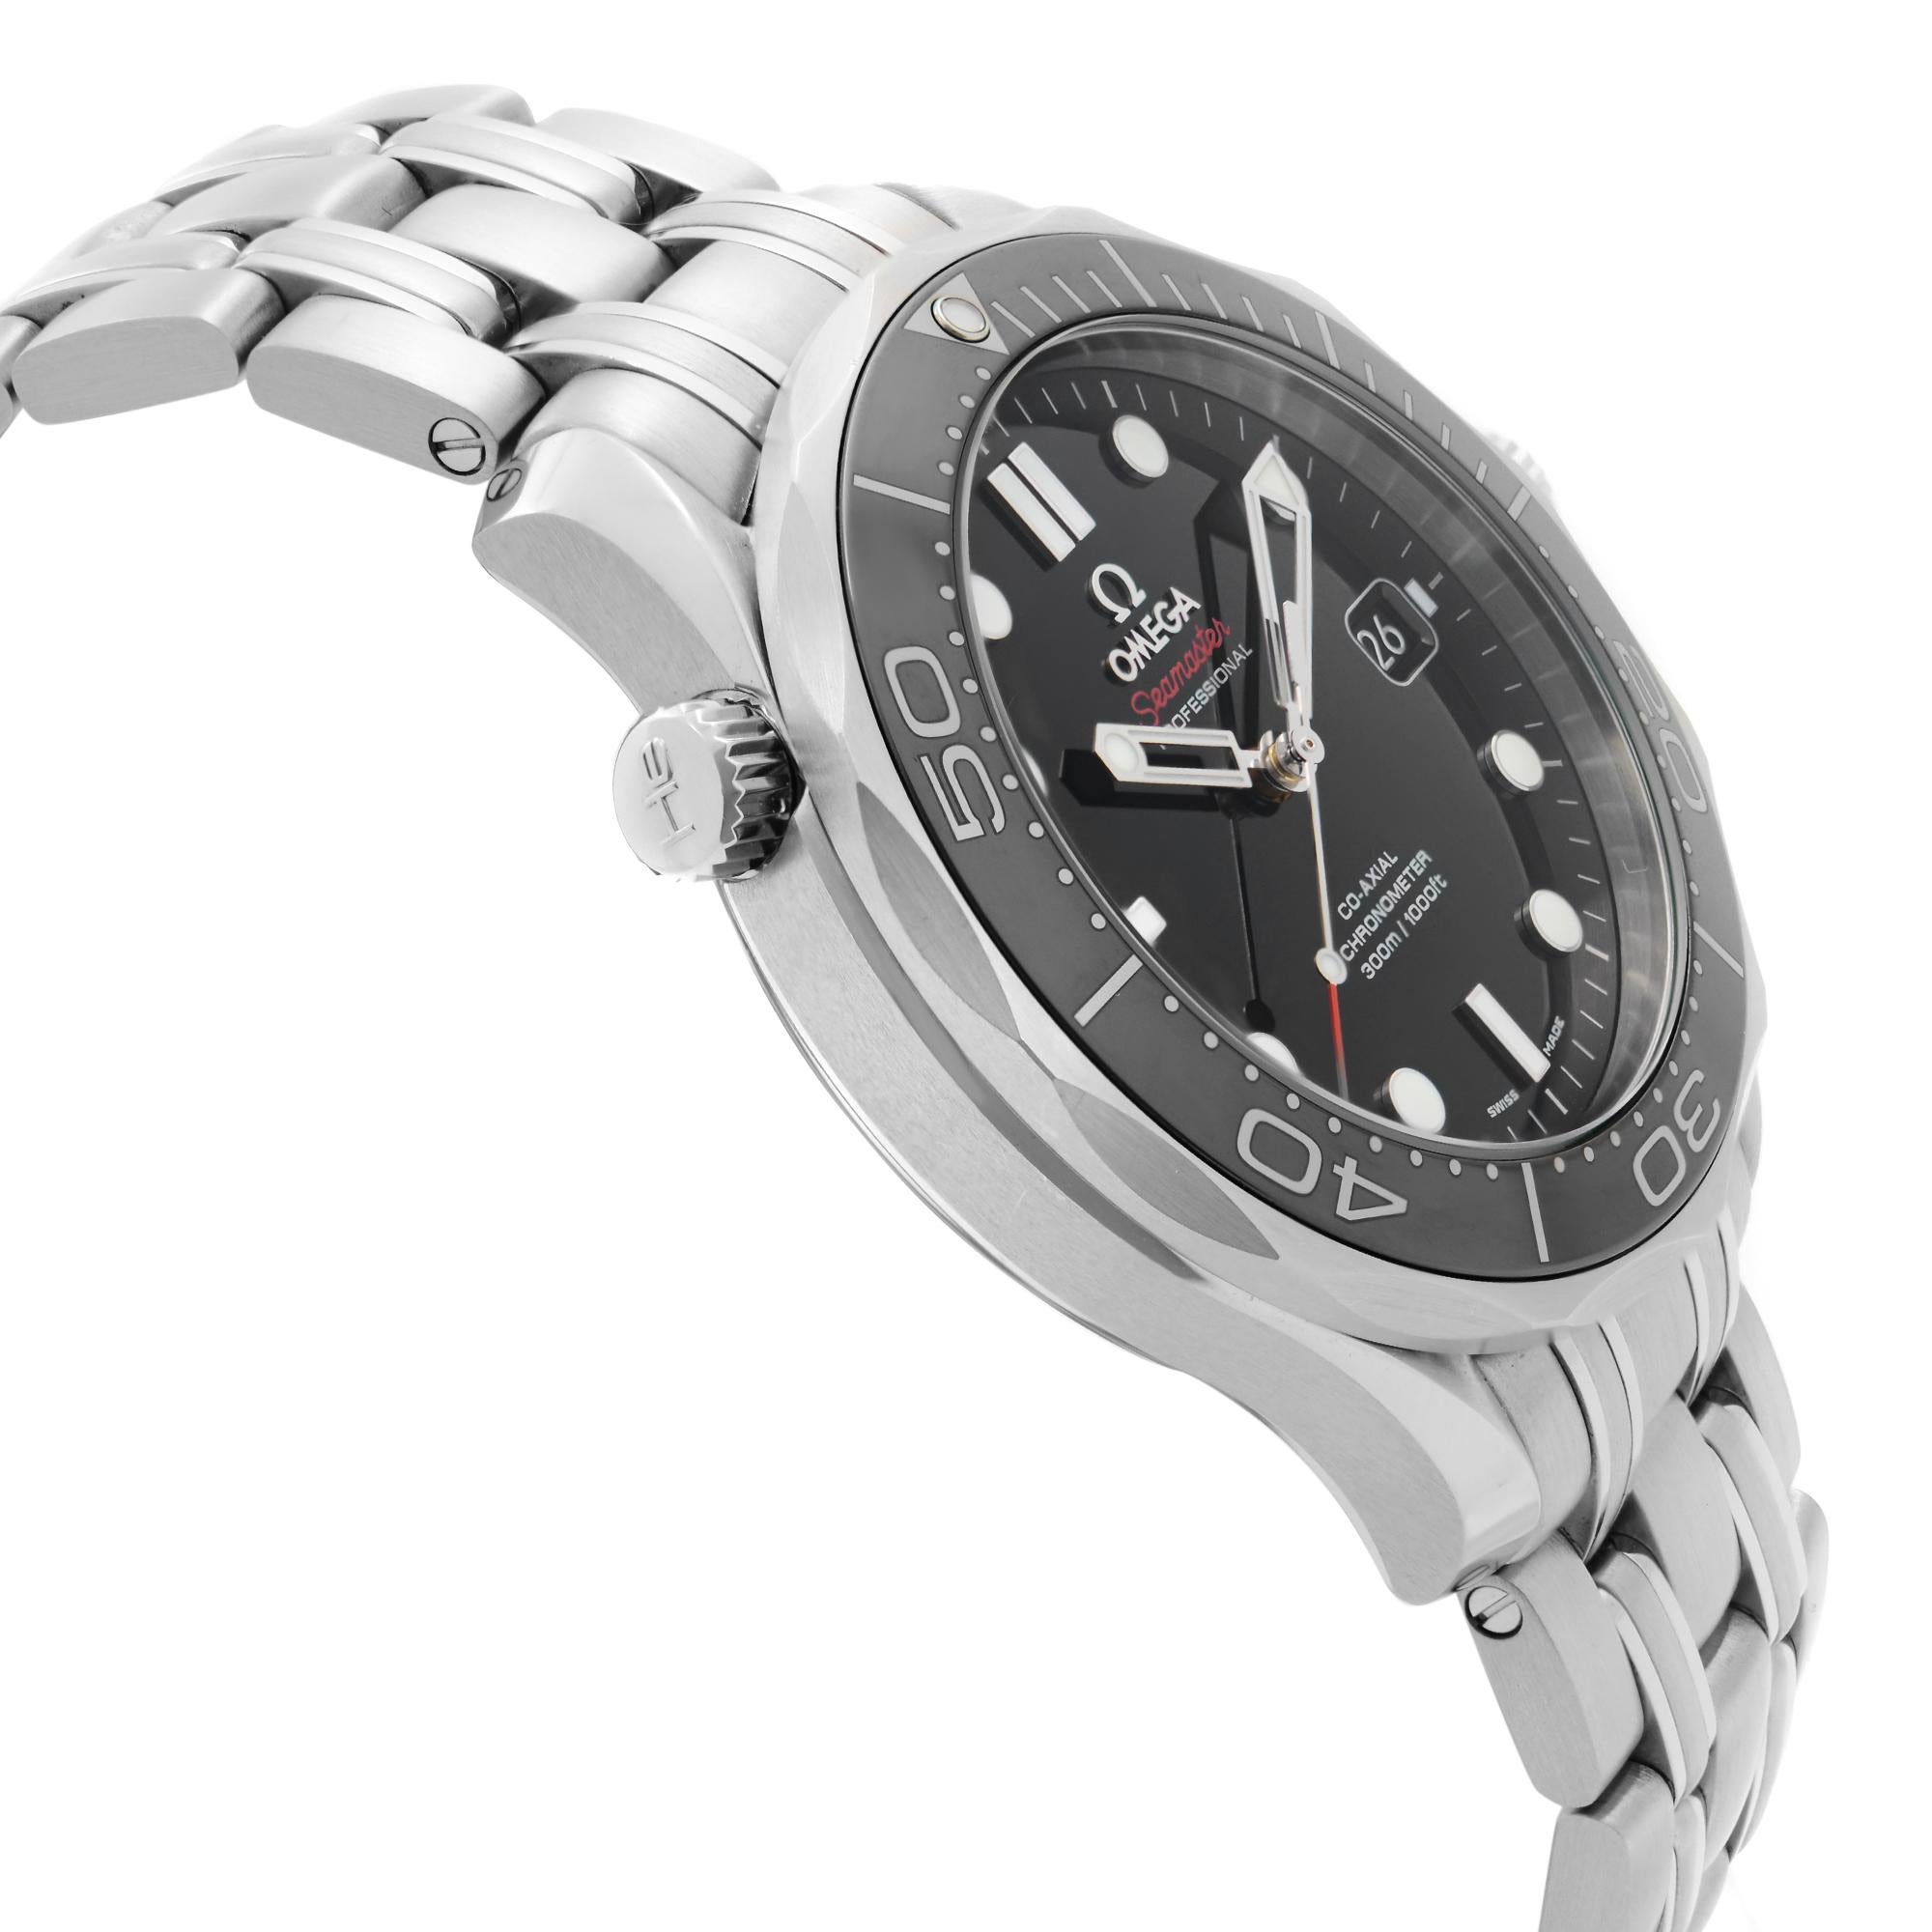 Men's Omega Seamaster Diver Steel Black Dial Automatic Watch 212.30.41.20.01.003